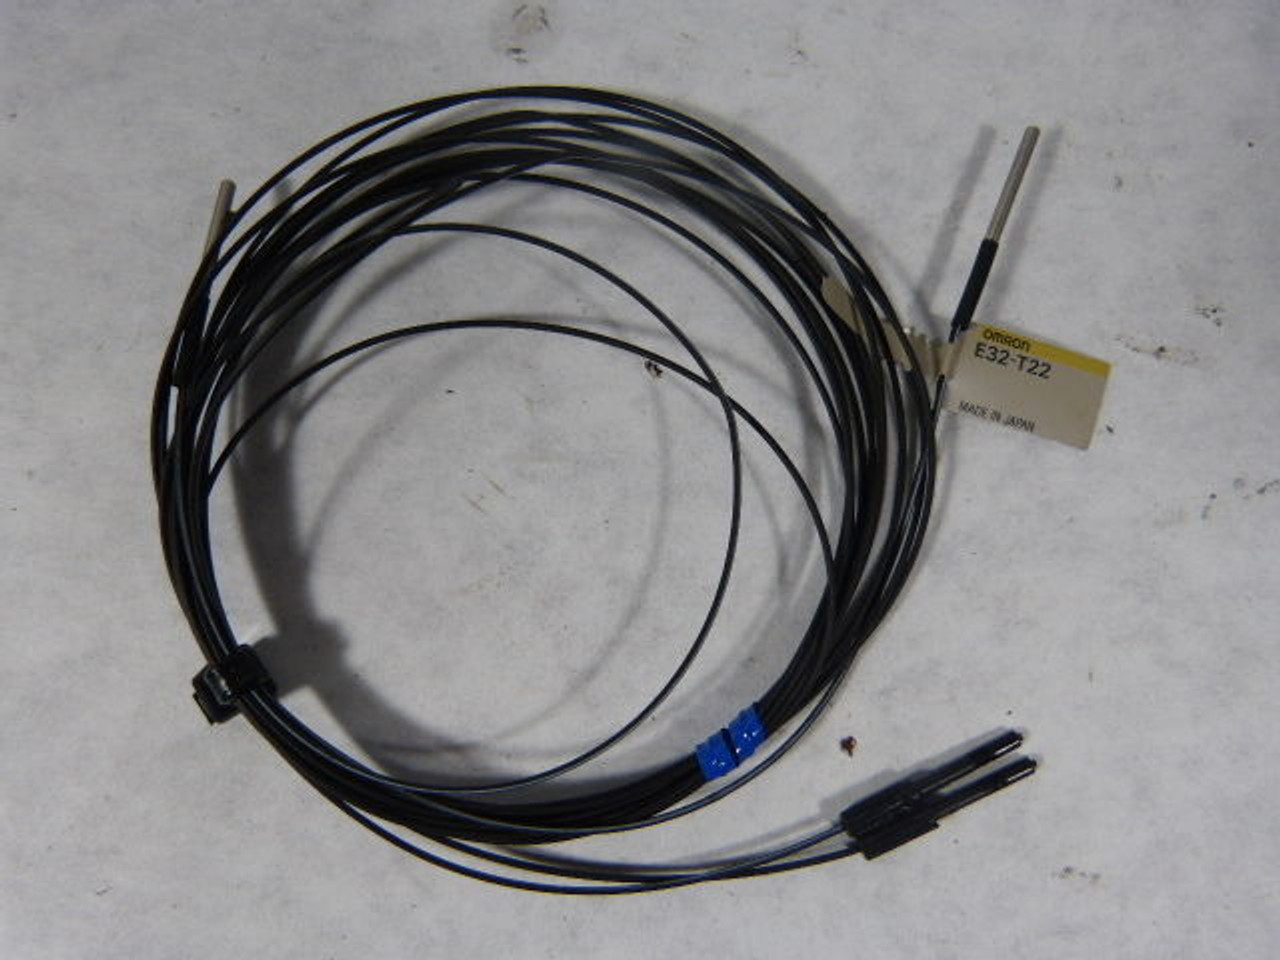 Omron E32-T22 Photoelectric Switch Fiber Unit USED